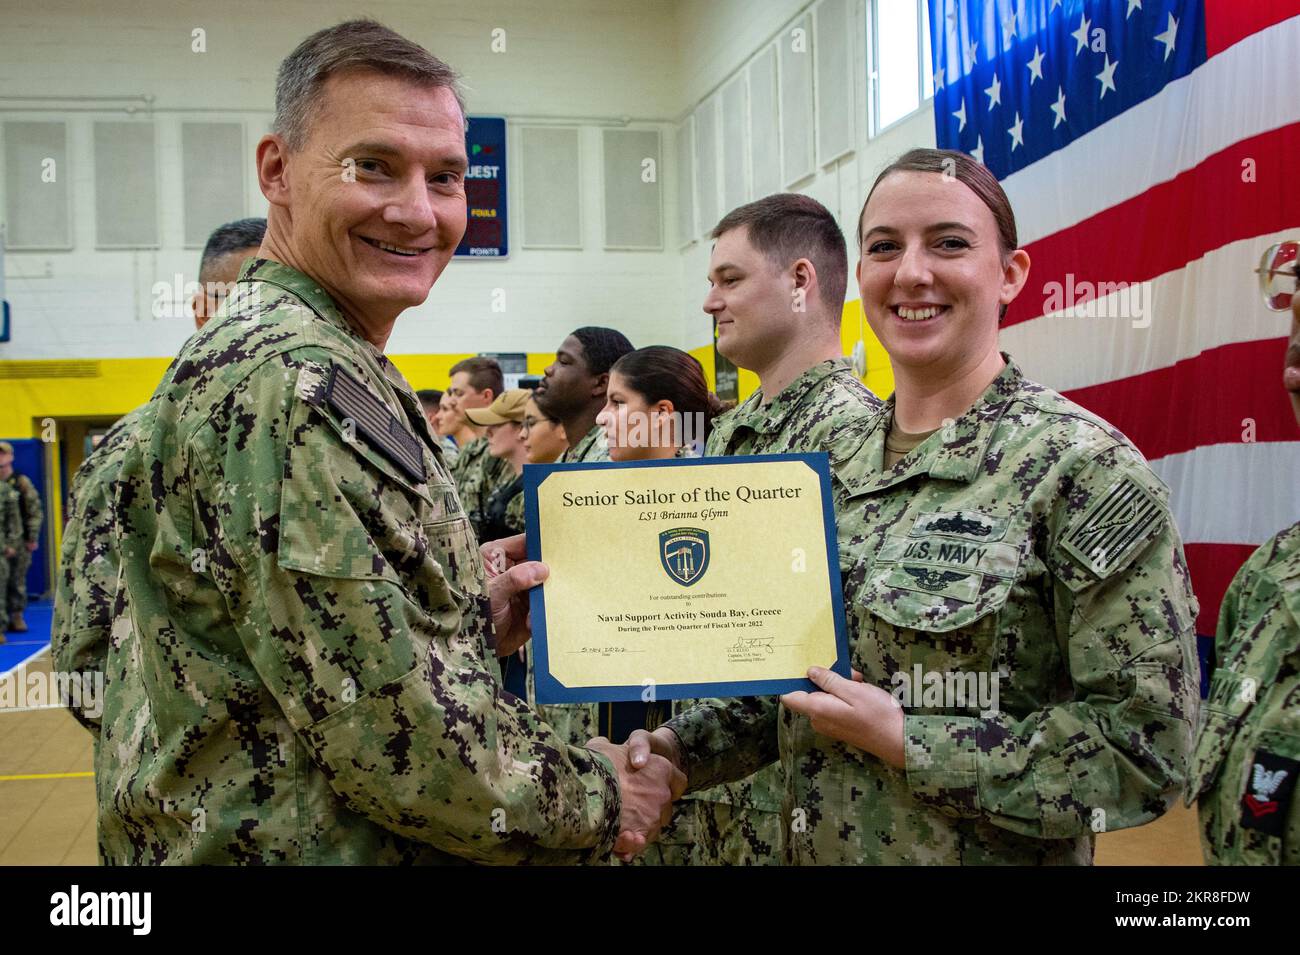 NAVAL SUPPORT ACTIVITY SOUDA BAY, Greece (Nov. 10, 2022) Capt. Odin Klug, commanding officer, Naval Support Activity (NSA) Souda Bay, Greece, recognizes Logistics Specialist 1st Class Brianna Glynn as NSA Souda Bay’s Senior Sailor of the Quarter for the fourth quarter of Fiscal Year 2022 during an awards ceremony on Nov. 10, 2022. NSA Souda Bay is an operational ashore installation which enables and supports U.S., Allied, Coalition, and Partner nation forces to preserve security and stability in the European, African, and Central Command areas of responsibility. Stock Photo